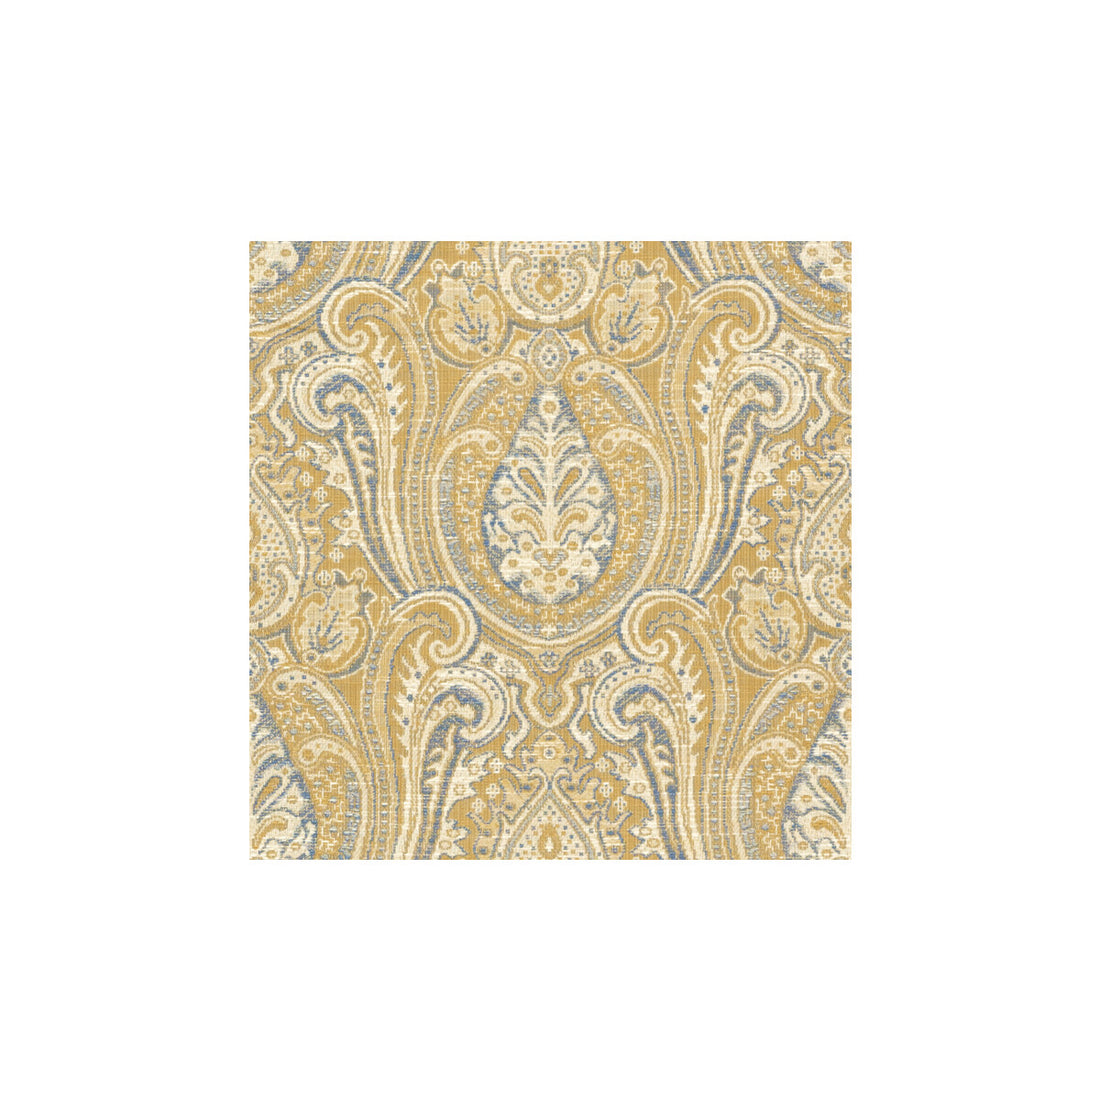 Kravet Contract fabric in 34775-415 color - pattern 34775.415.0 - by Kravet Contract in the Gis collection